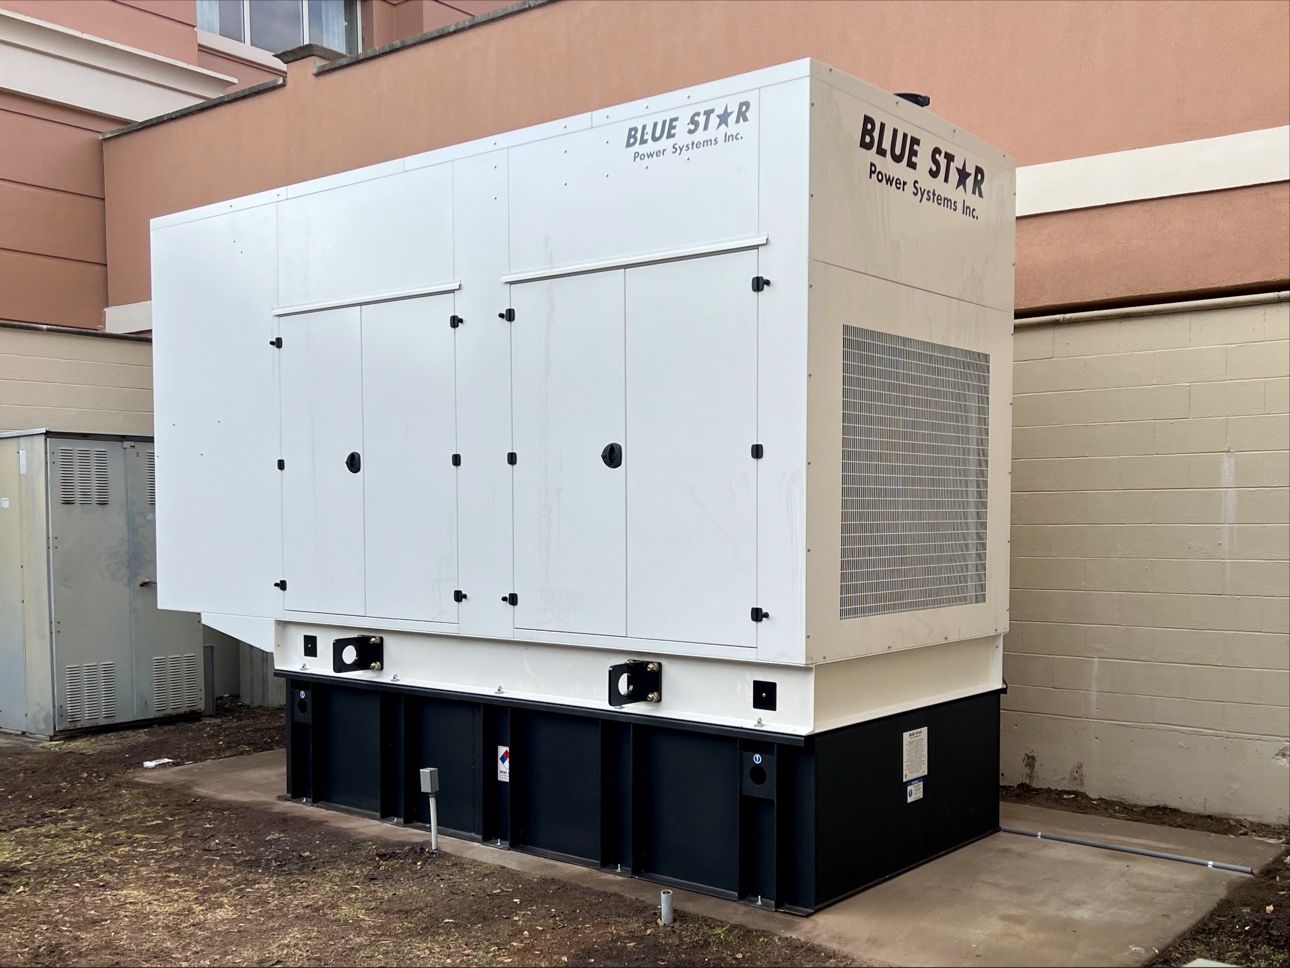 Blue Star Power System PD600 generator outside of an orange and white building